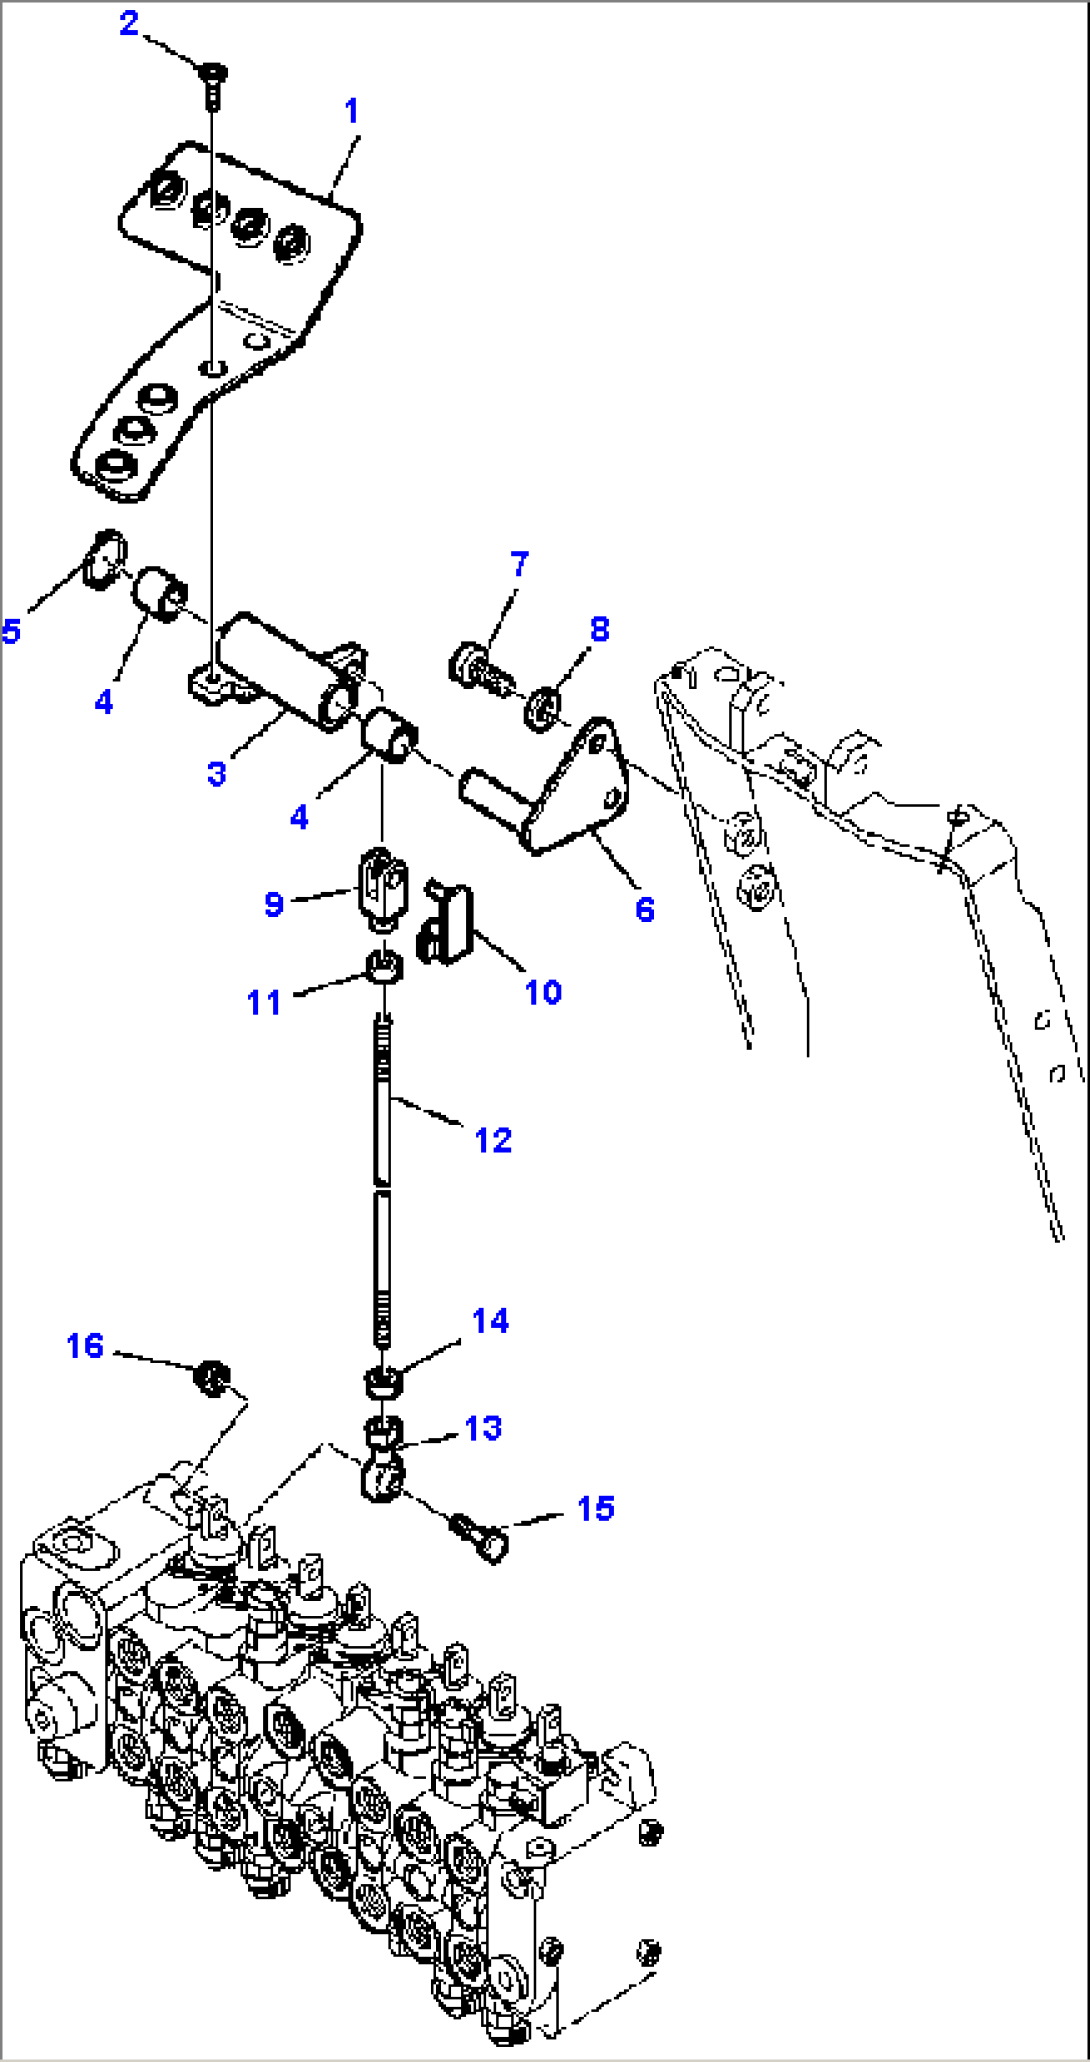 K4520-01A0 HAMMER CONTROL PEDAL ISO PATTERN